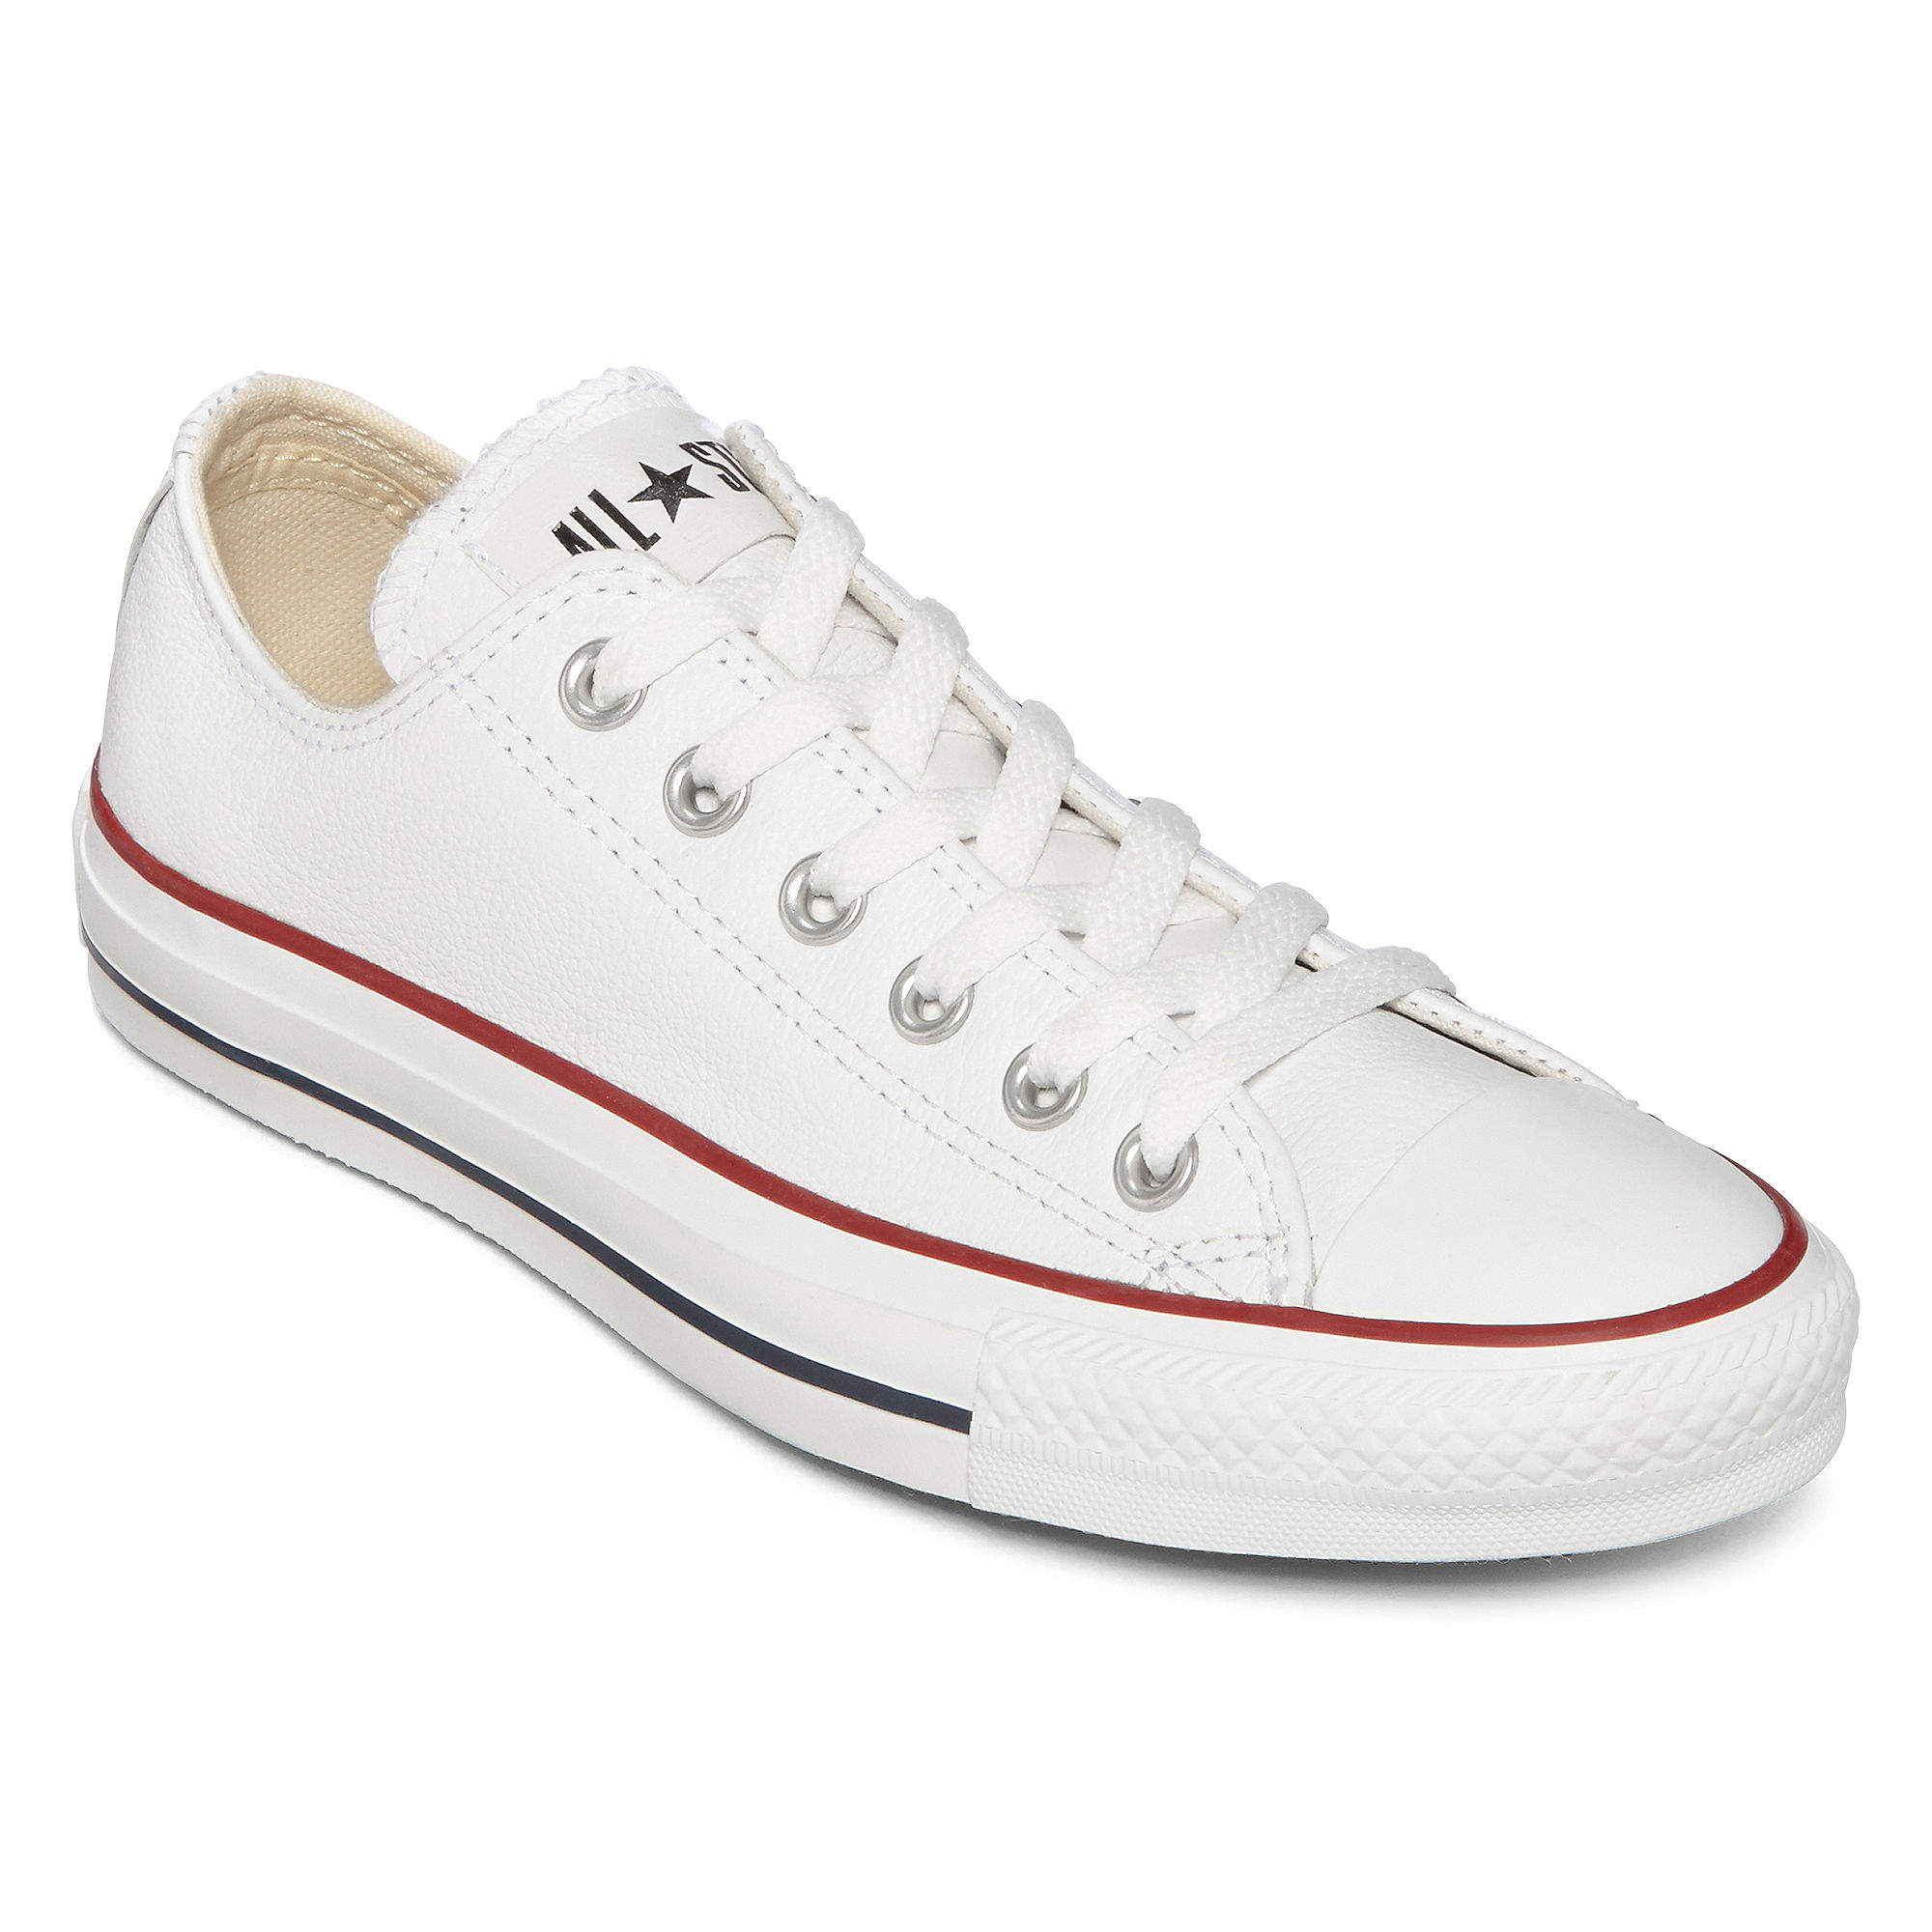 UPC 886951121885 product image for Converse Chuck Taylor All Star Womens Ox Leather Sneakers | upcitemdb.com